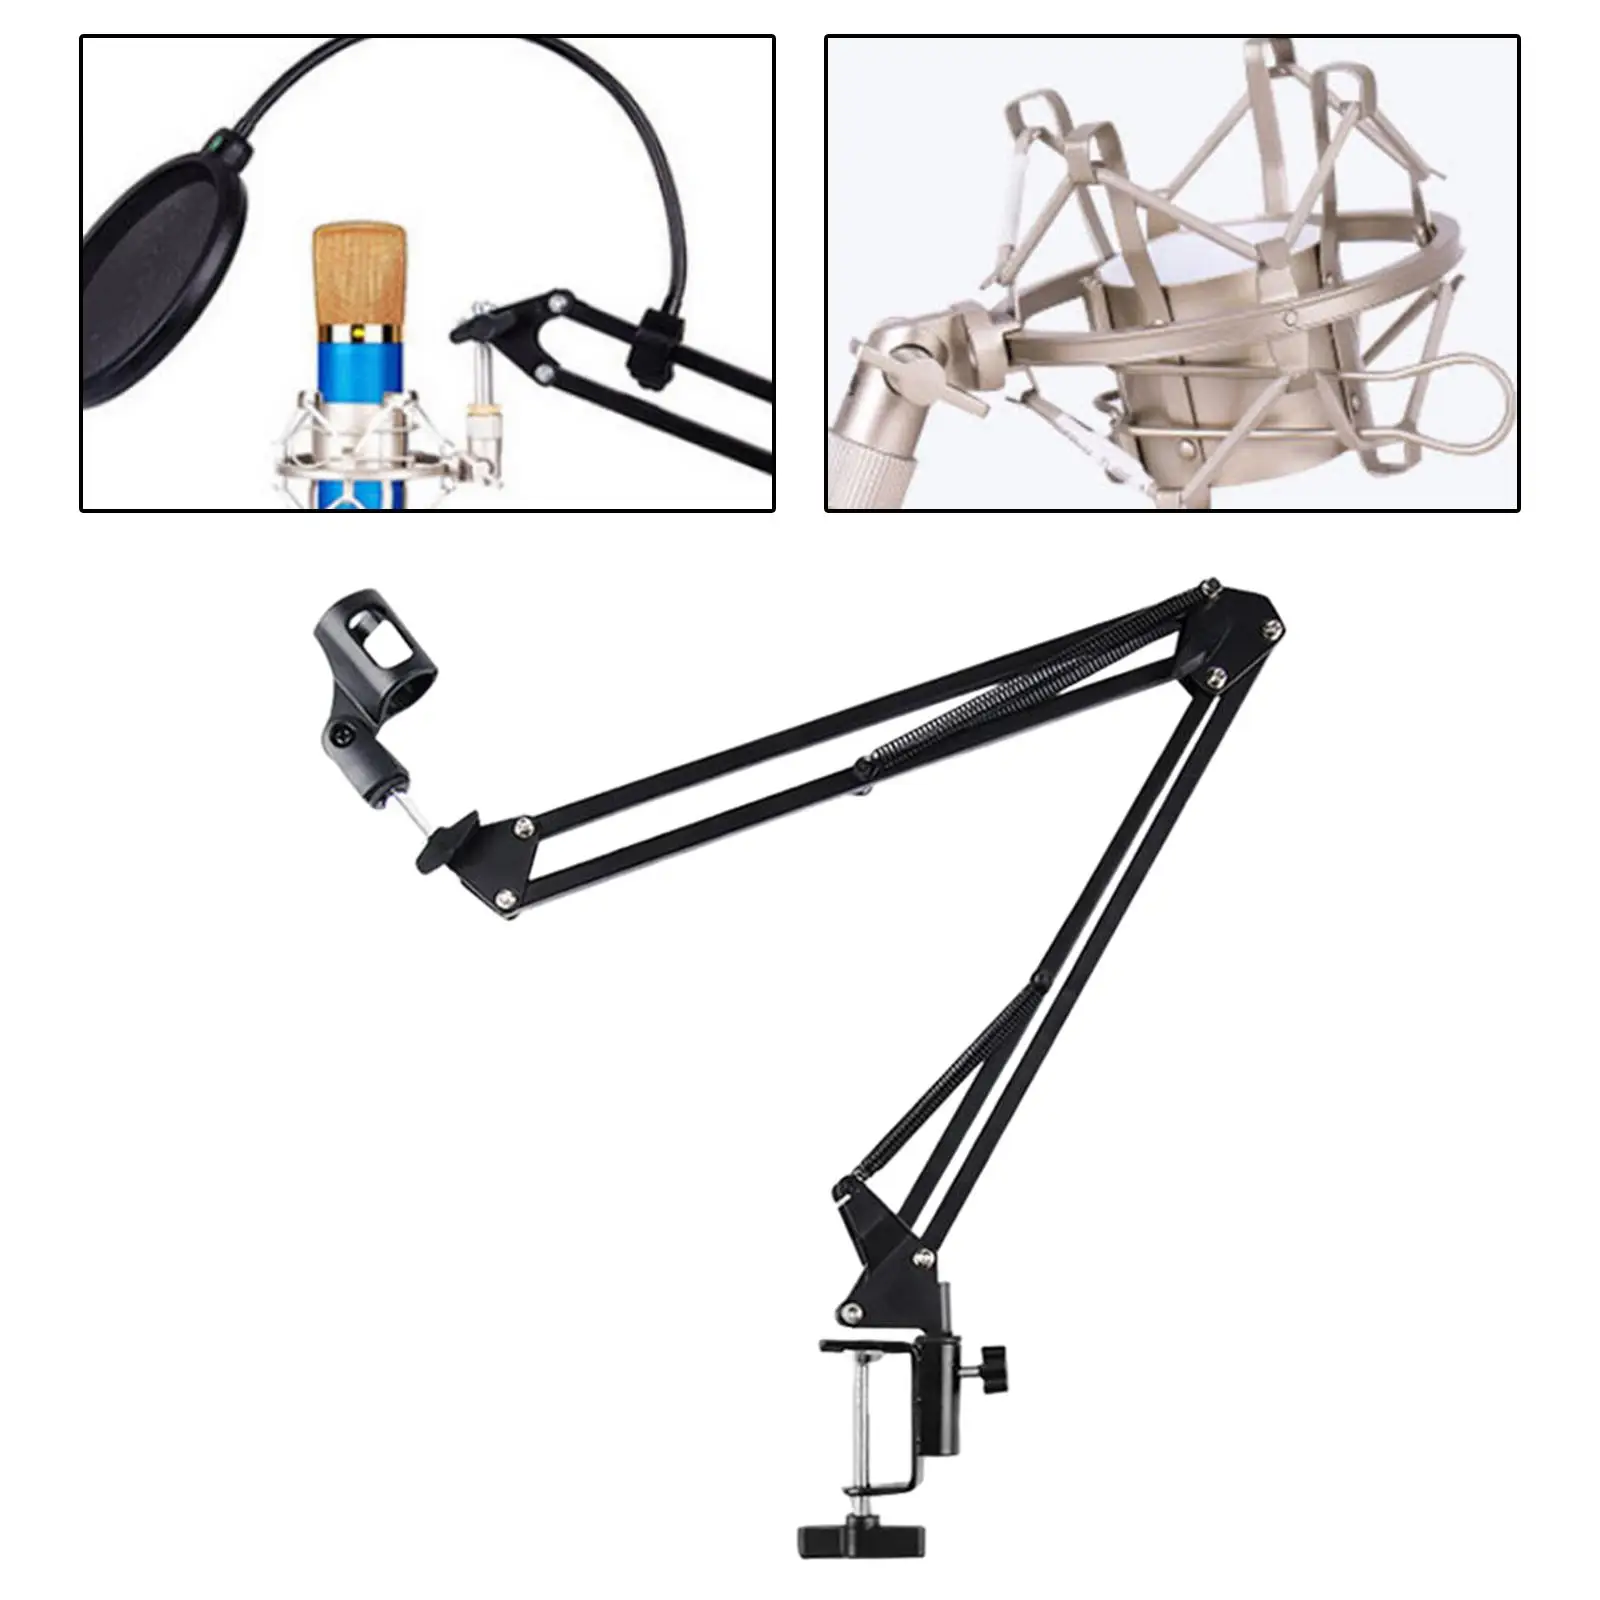 Adjustable Mic Stand Stable with Desk Clamp Sturdy Universal Steel Desktop Holder Mic  Mount for Broadcasting Studio